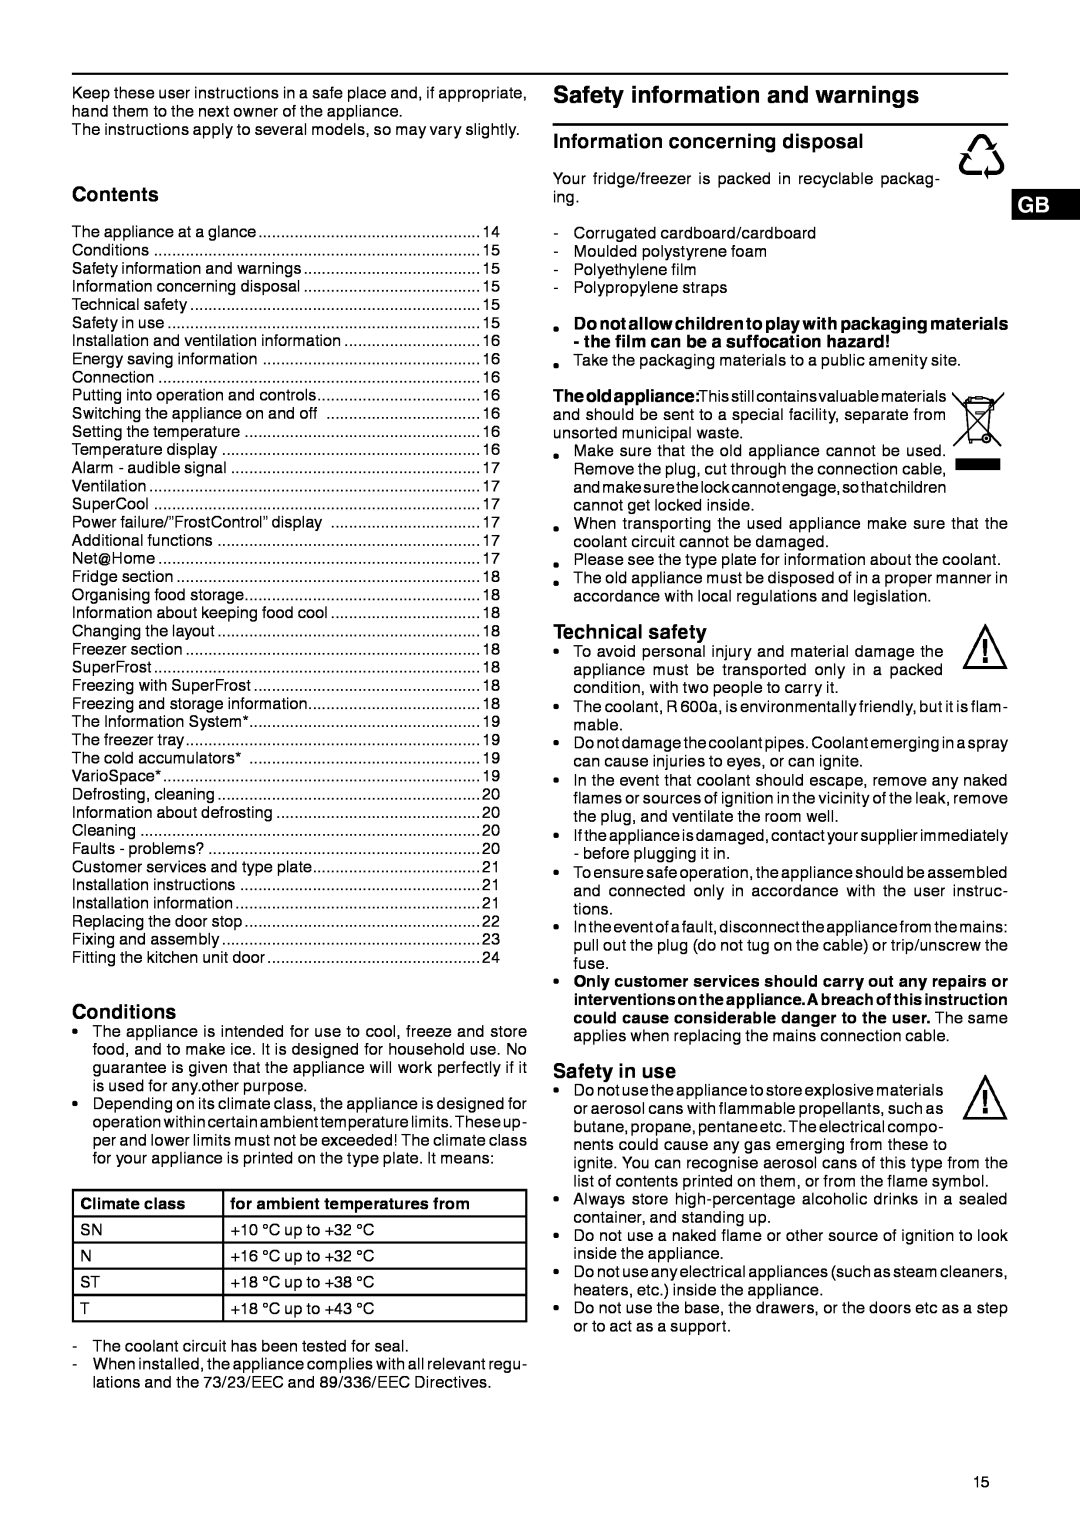 Liebherr 7082 532-00 Safety information and warnings, Contents, Conditions, Information concerning disposal, Safety in use 